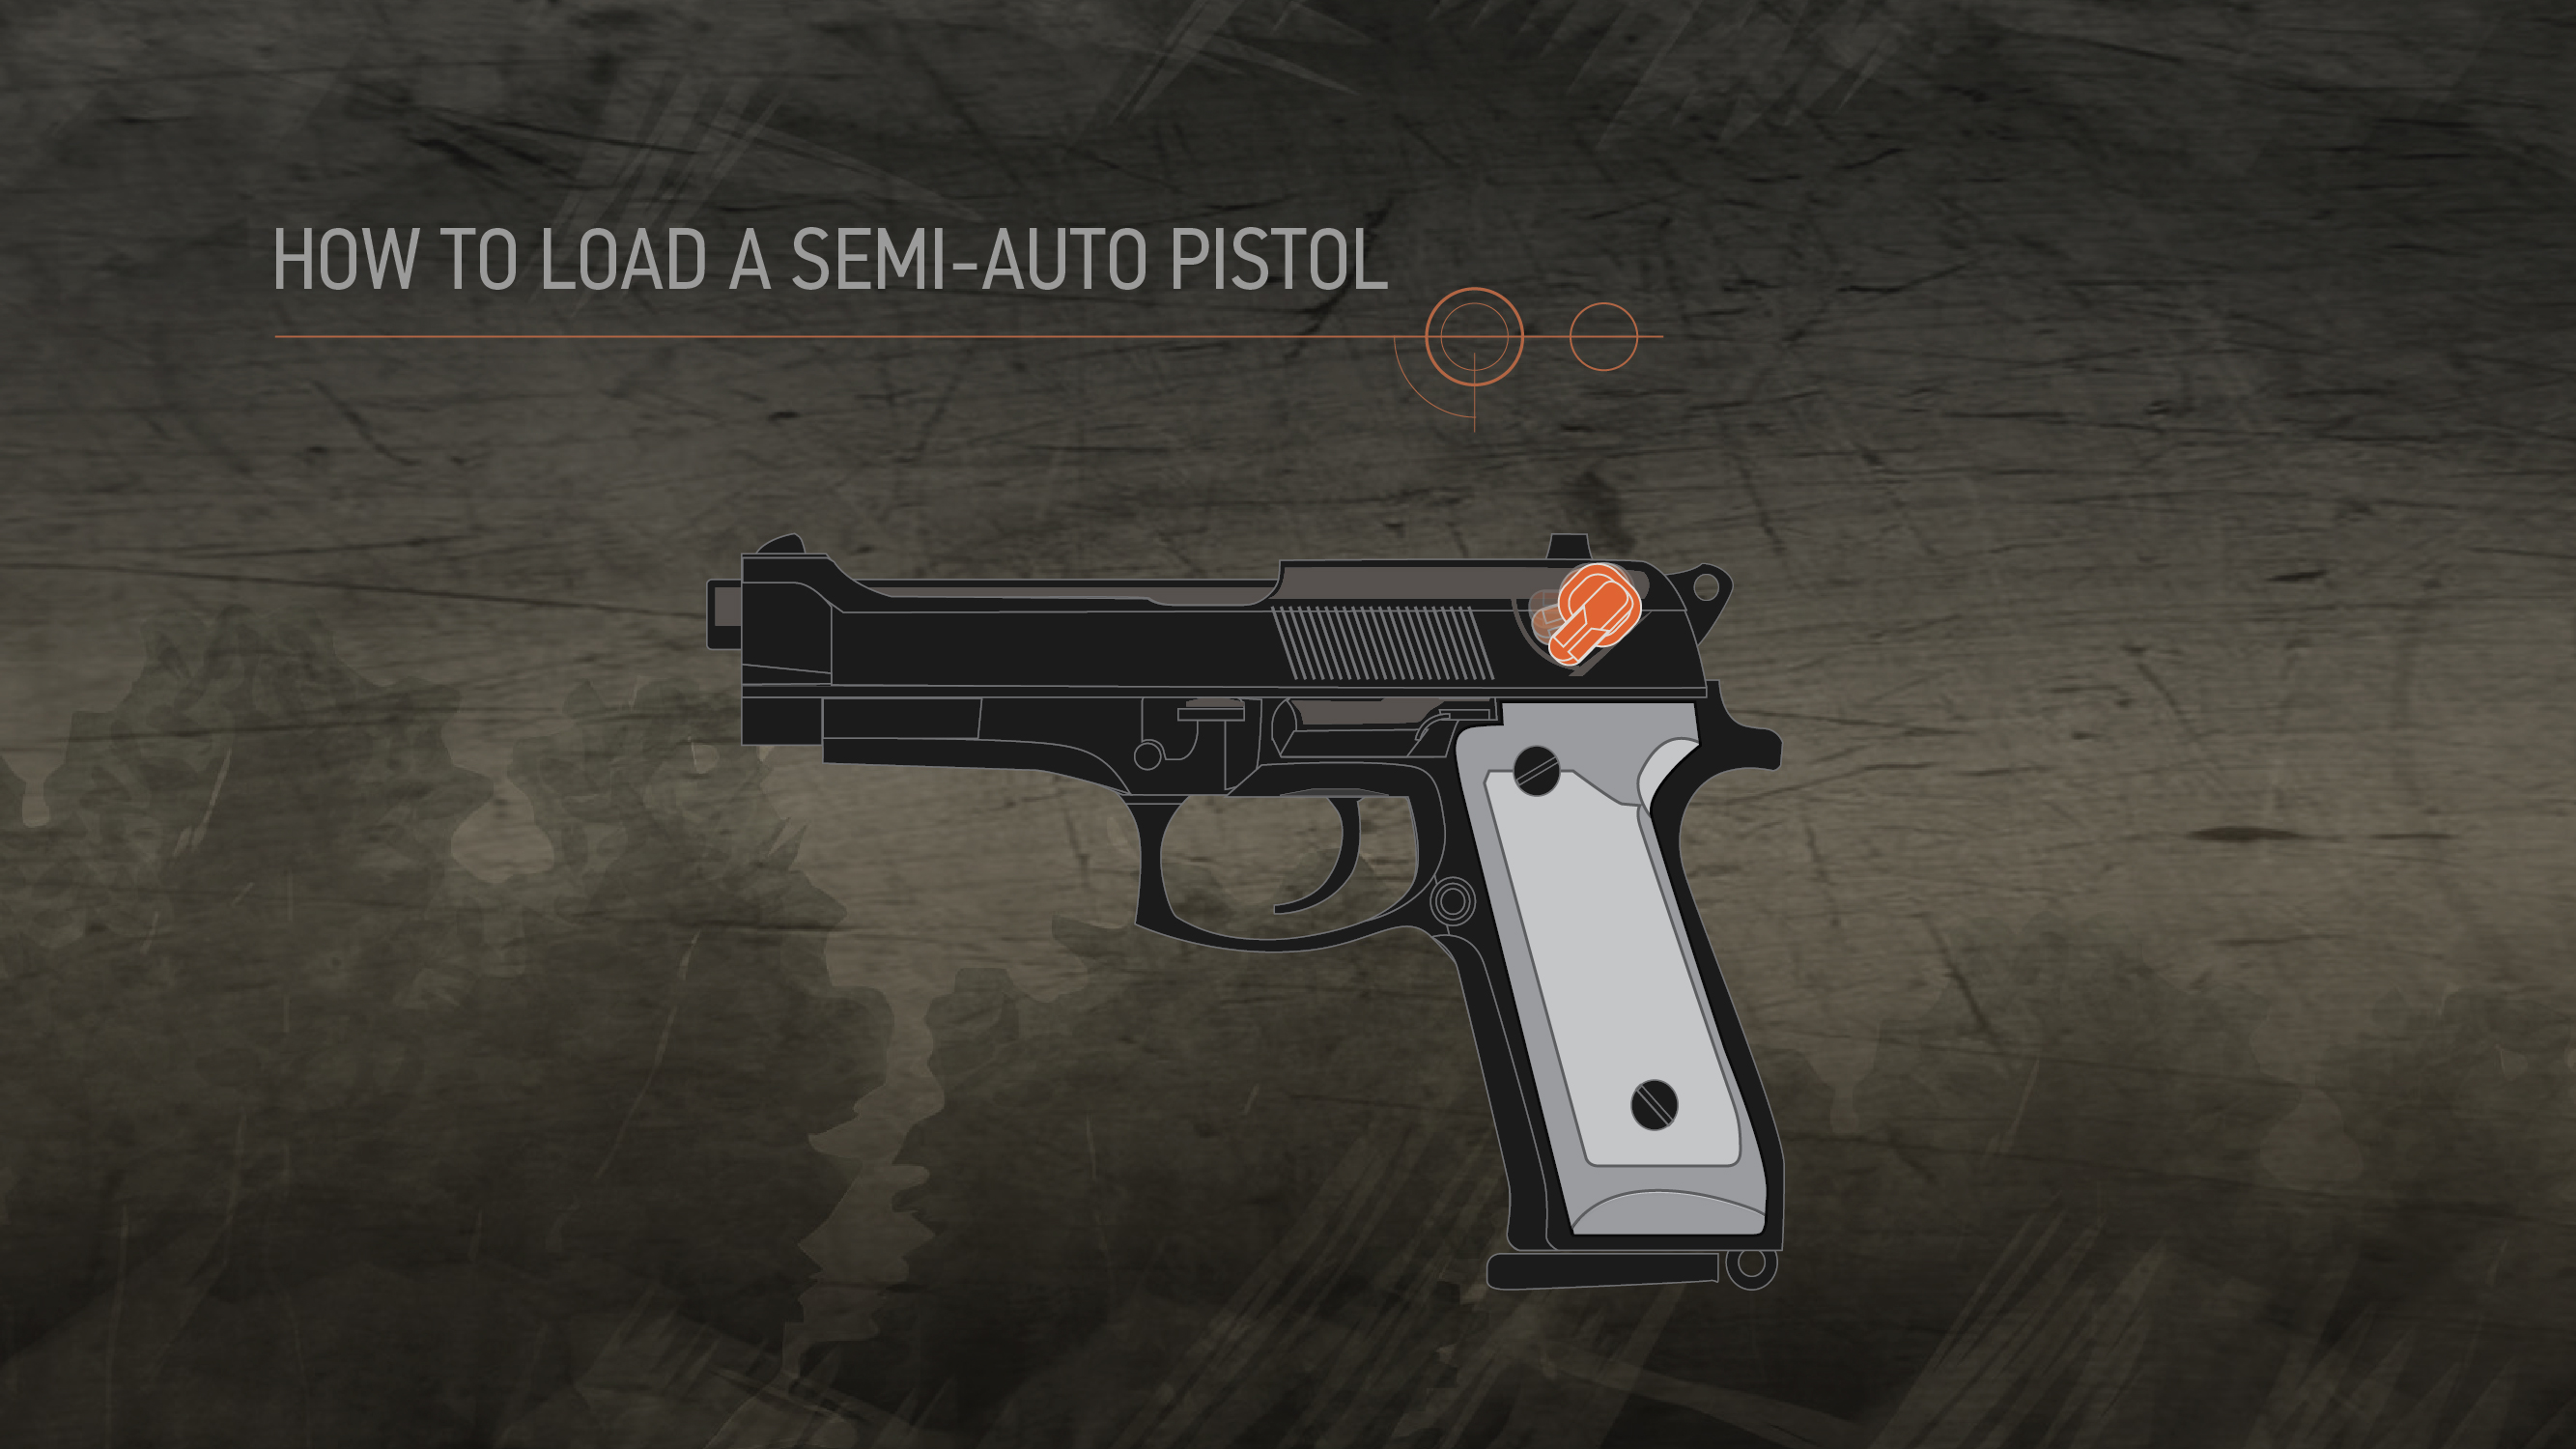 Illustration of a semi-auto pistol with the safety highlighted in orange.